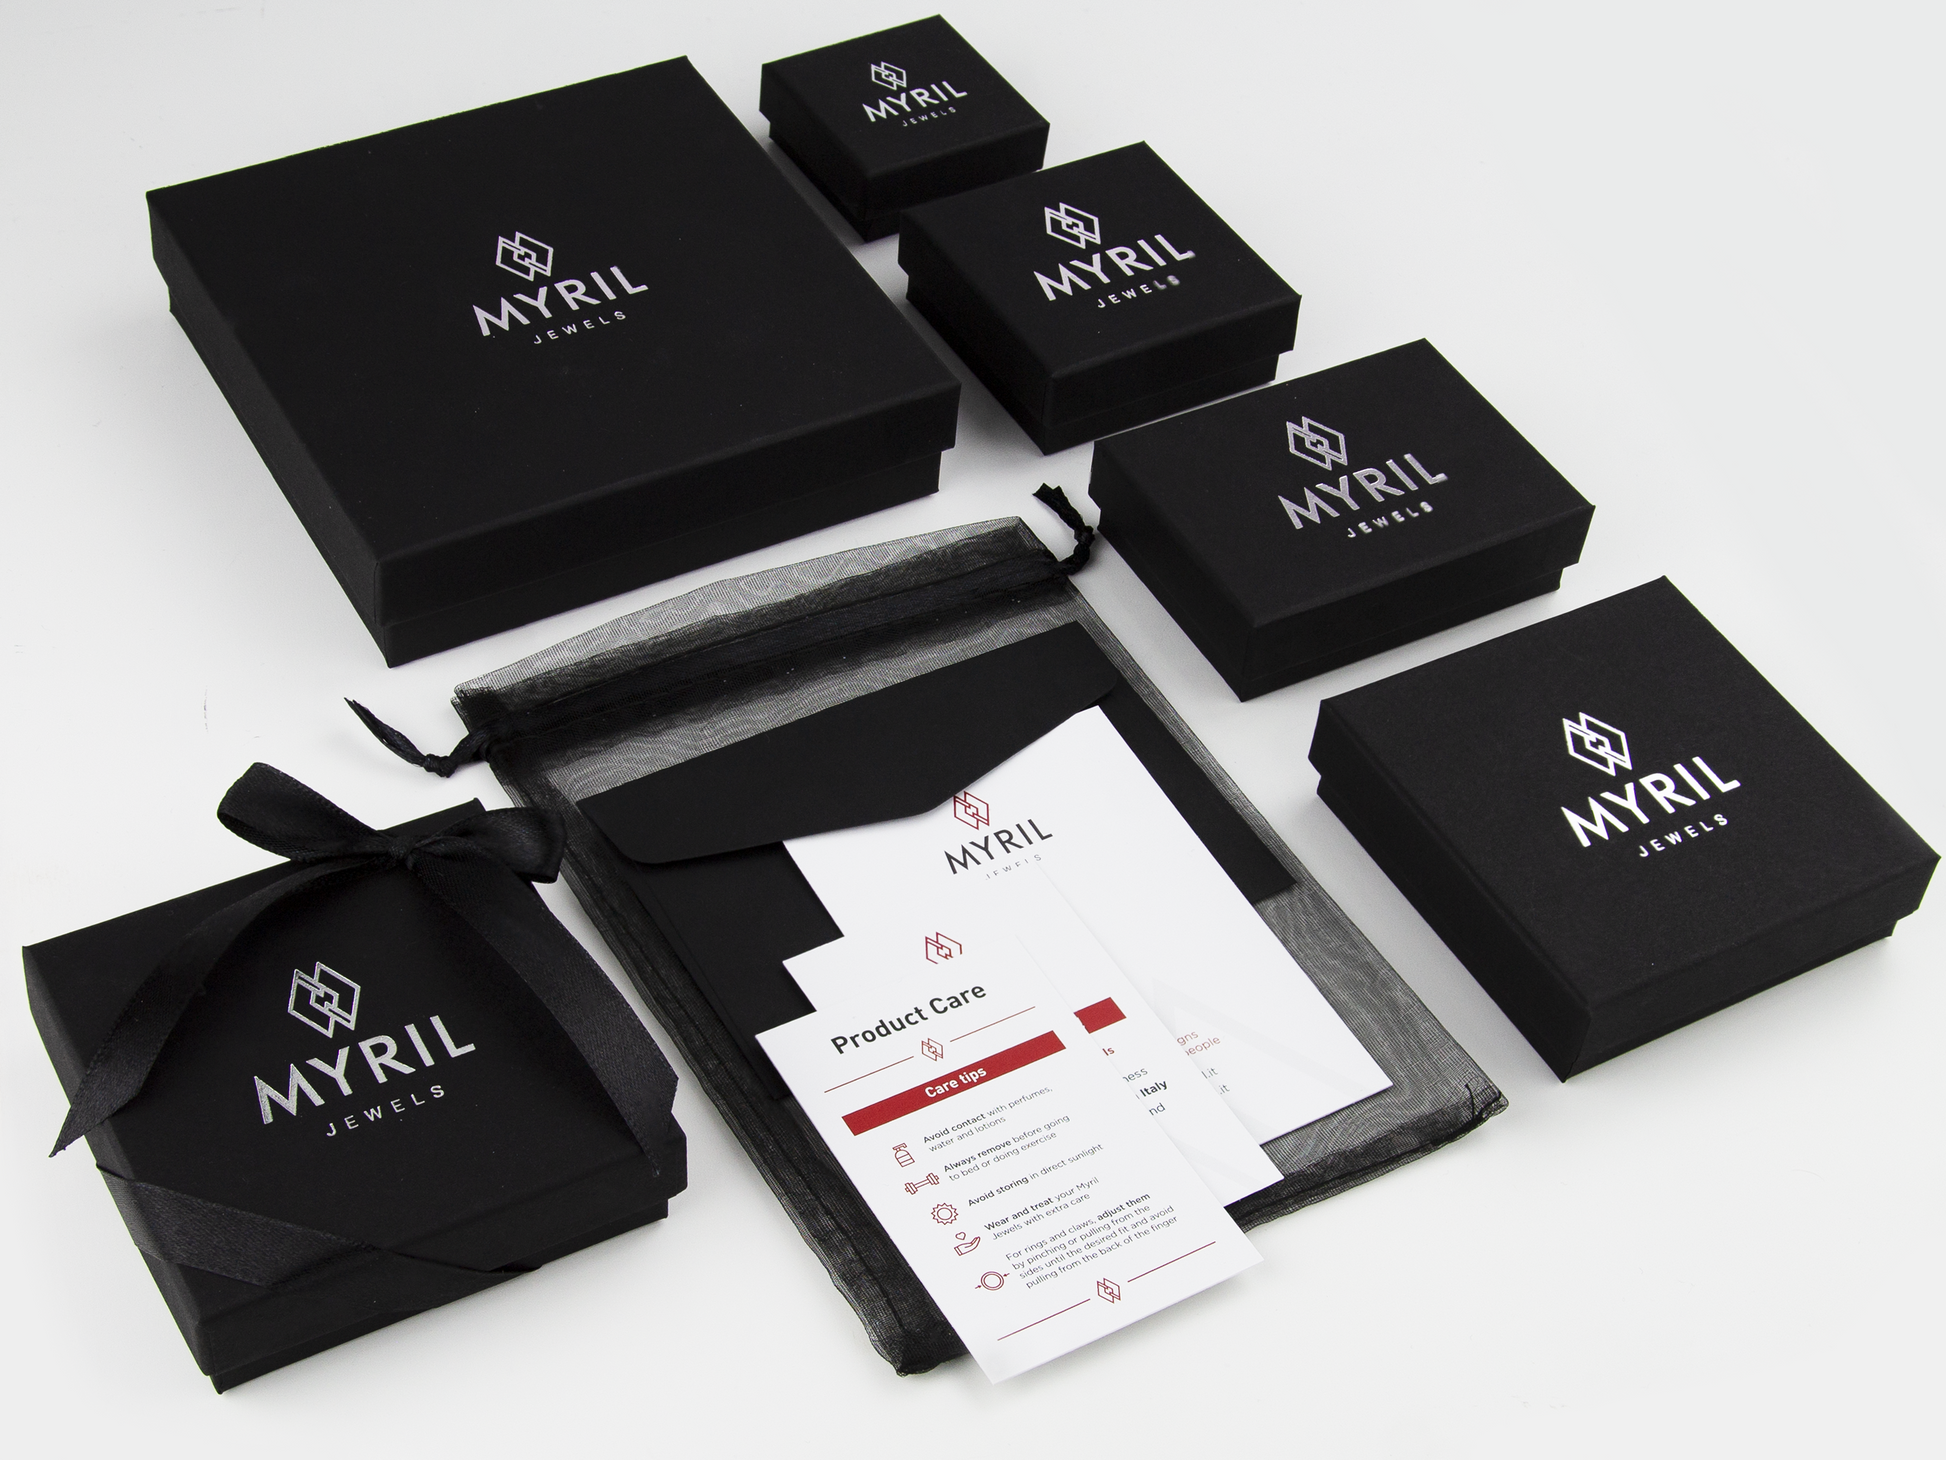 Assortment of Myril Jewels brand packaging, featuring elegant black boxes of various sizes with the company's logo in silver, along with care instructions and black organza gift bags, representing sophisticated goth jewelry presentation and branding.